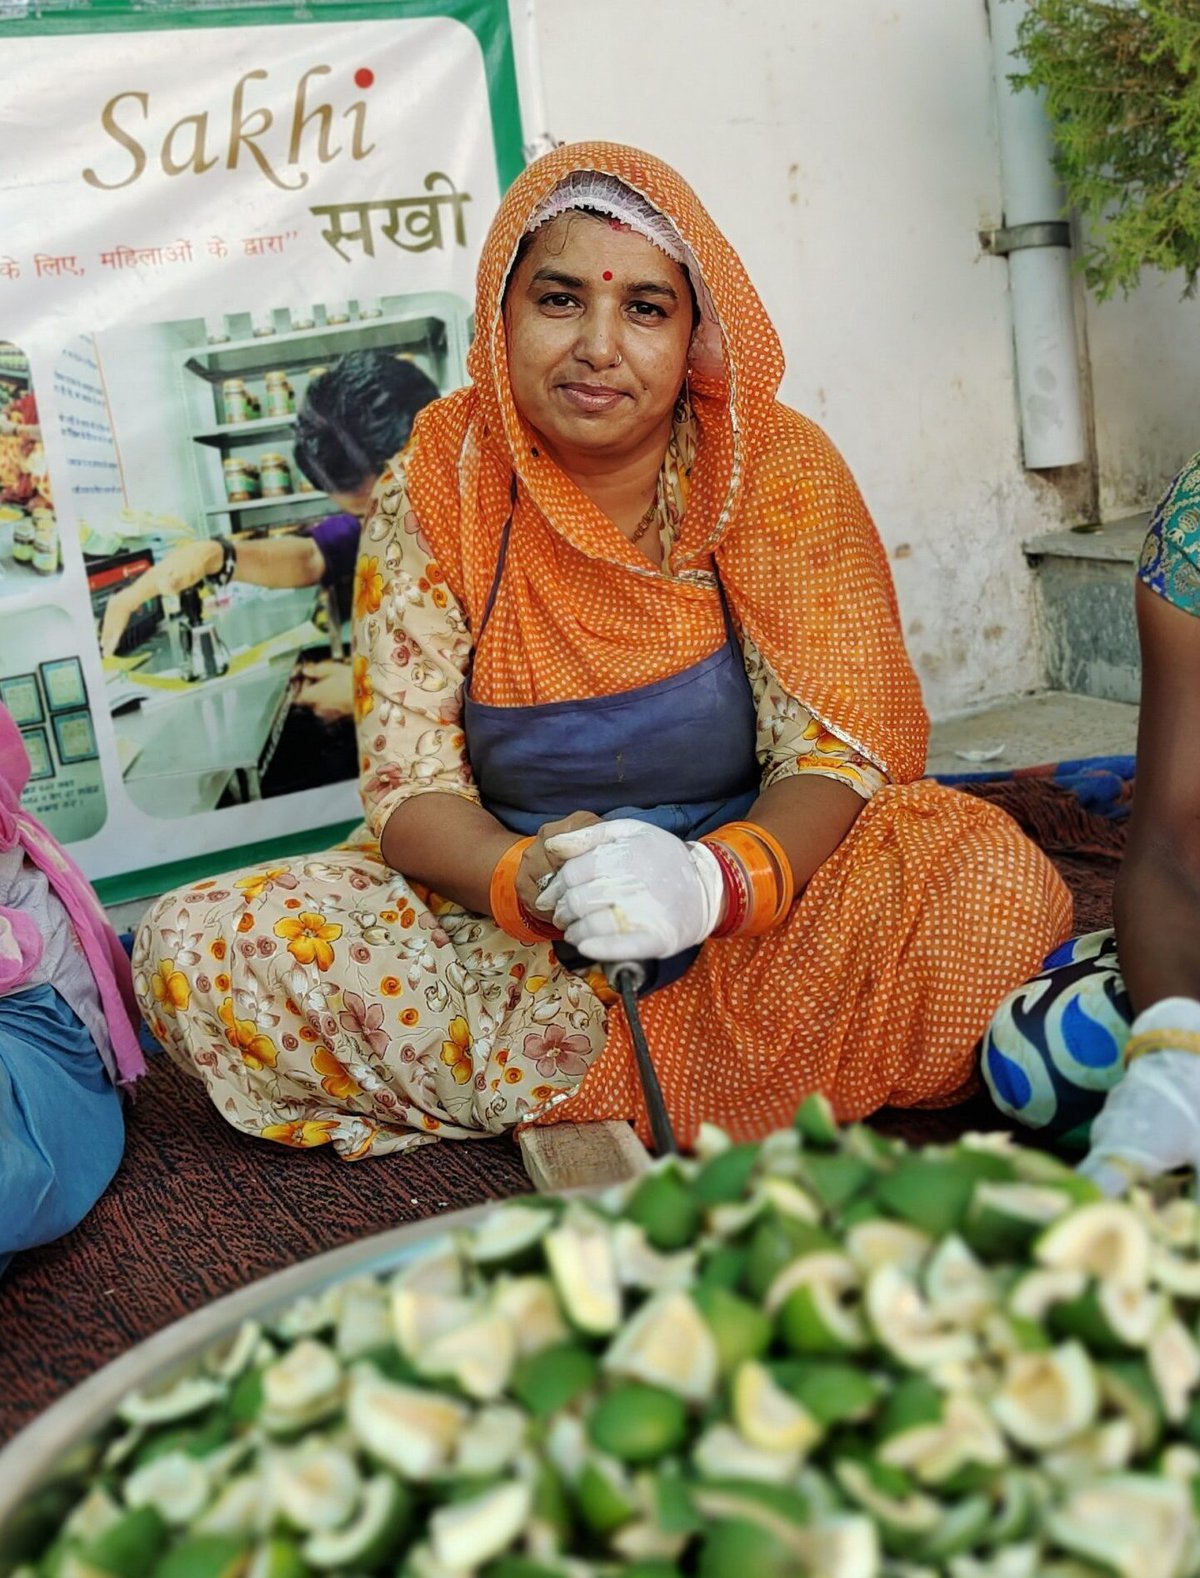 A woman sits with a bowl of fruit in front of her.